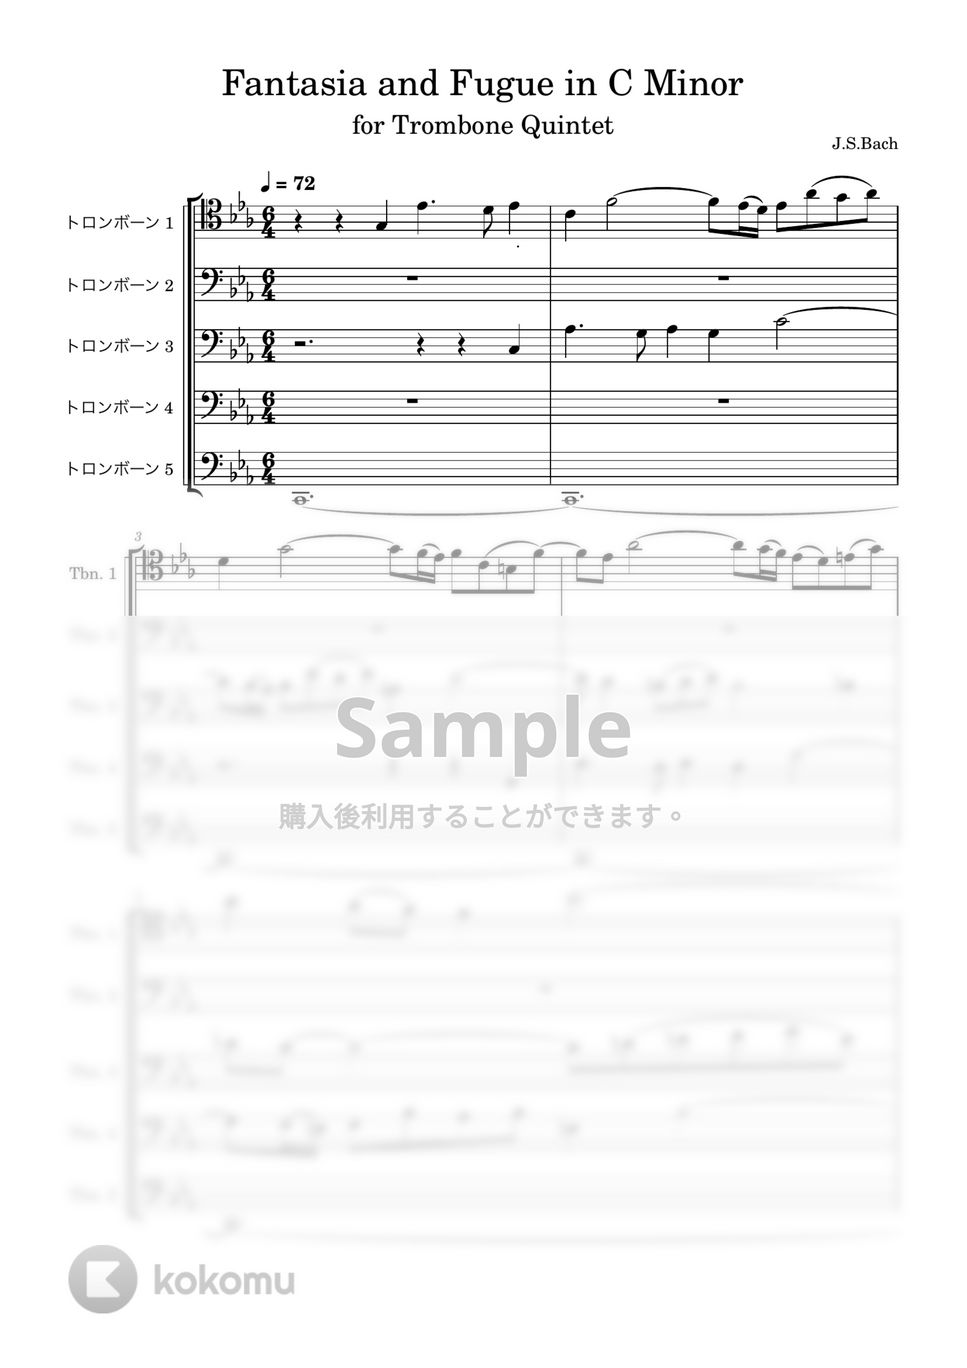 J.S.Bach - 幻想曲とフーガハ短調 (トロンボーン５重奏) by 川上龍